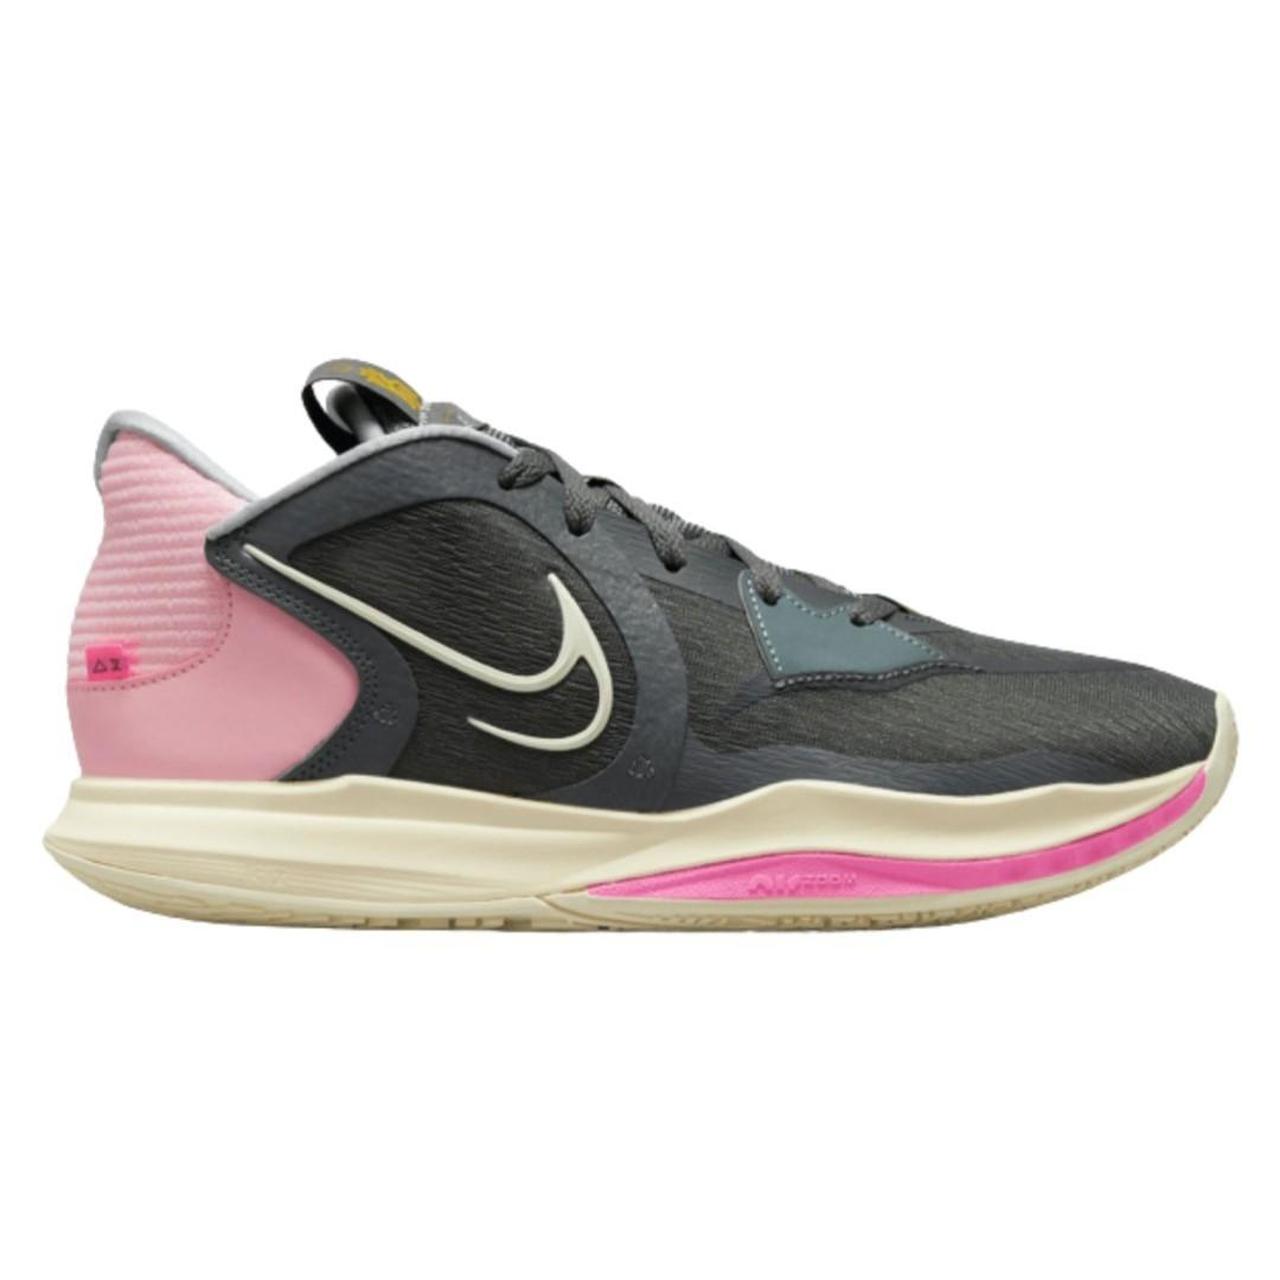 Nike, Shoes, Nike Kylie Low 3 Size 3 Mens